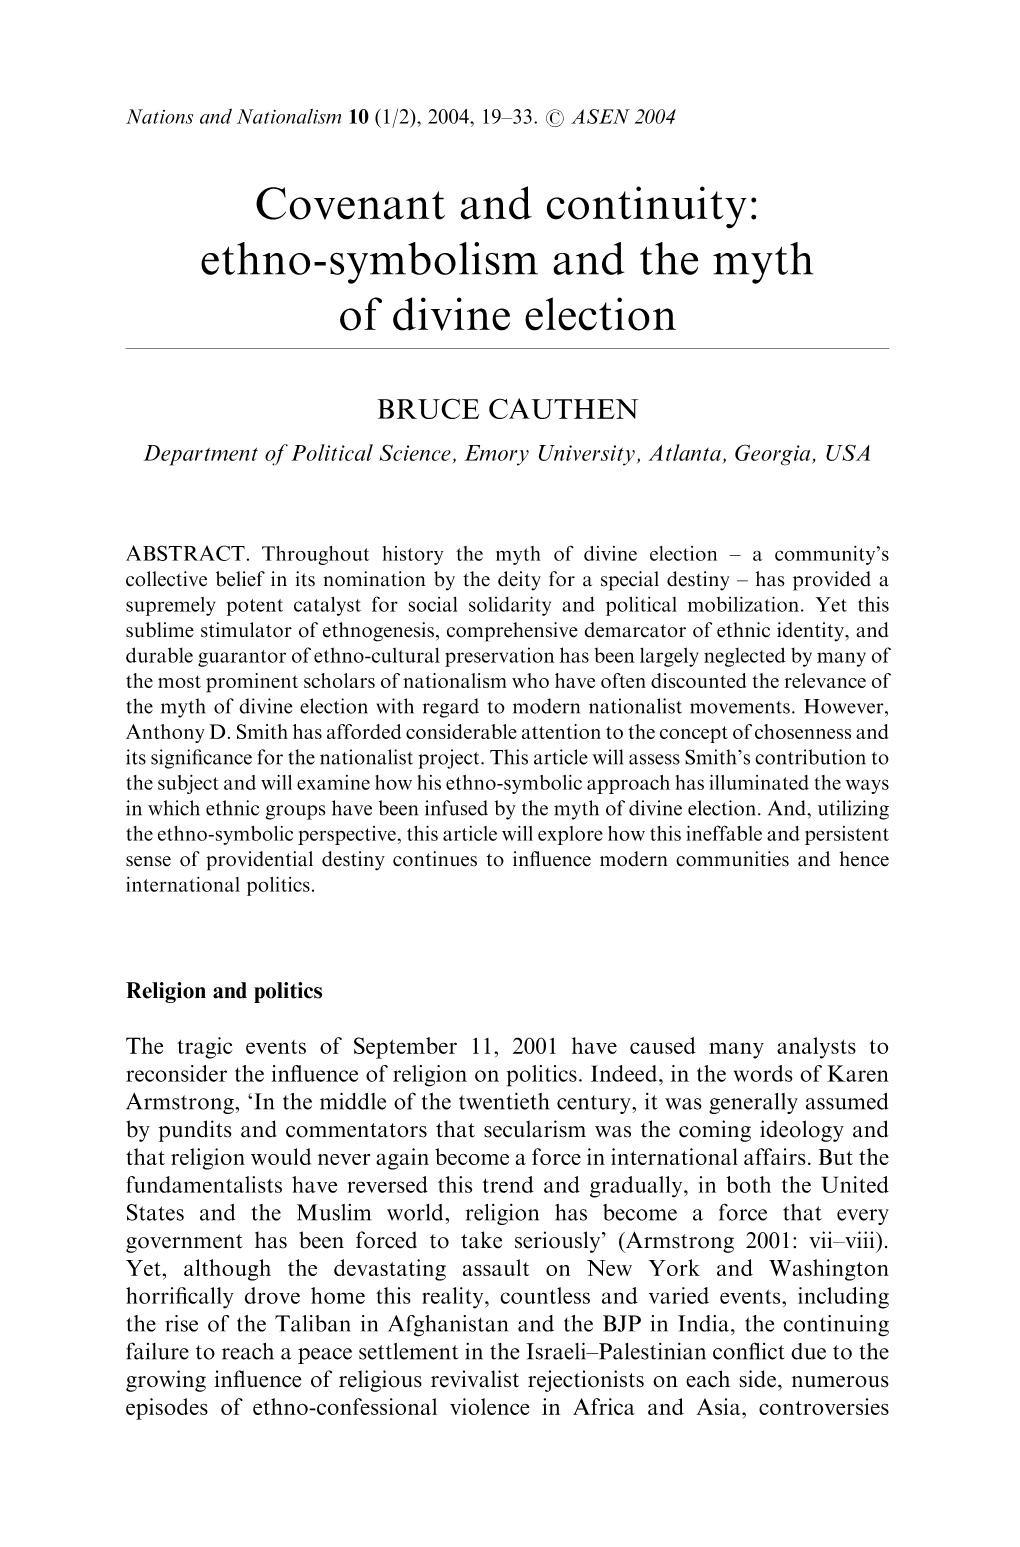 Ethno-Symbolism and the Myth of Divine Election